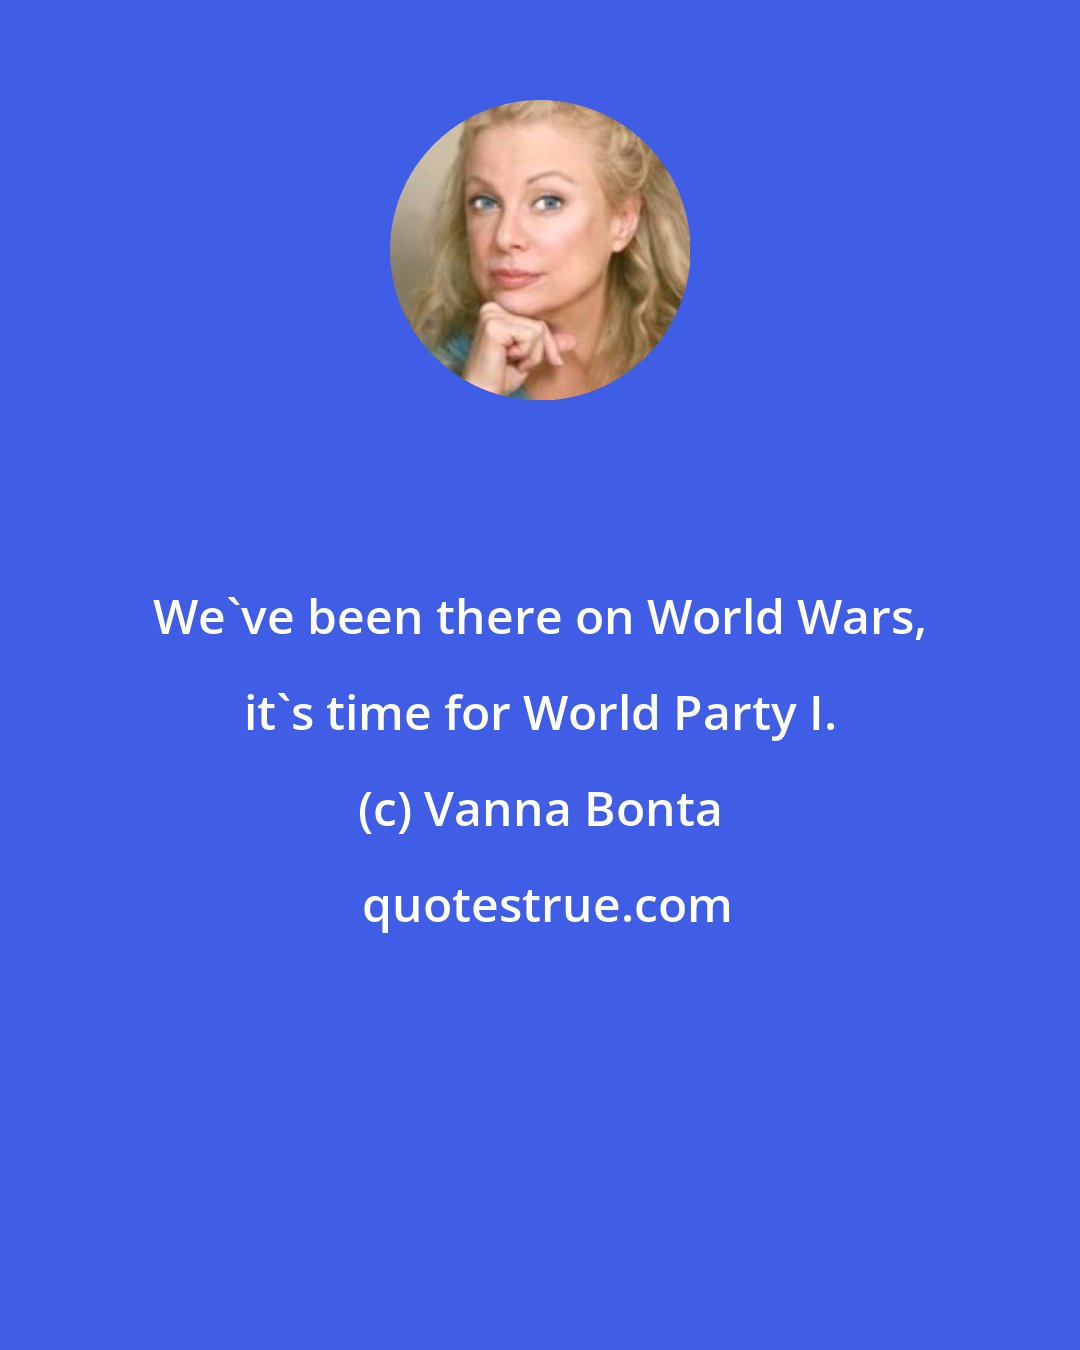 Vanna Bonta: We've been there on World Wars, it's time for World Party I.